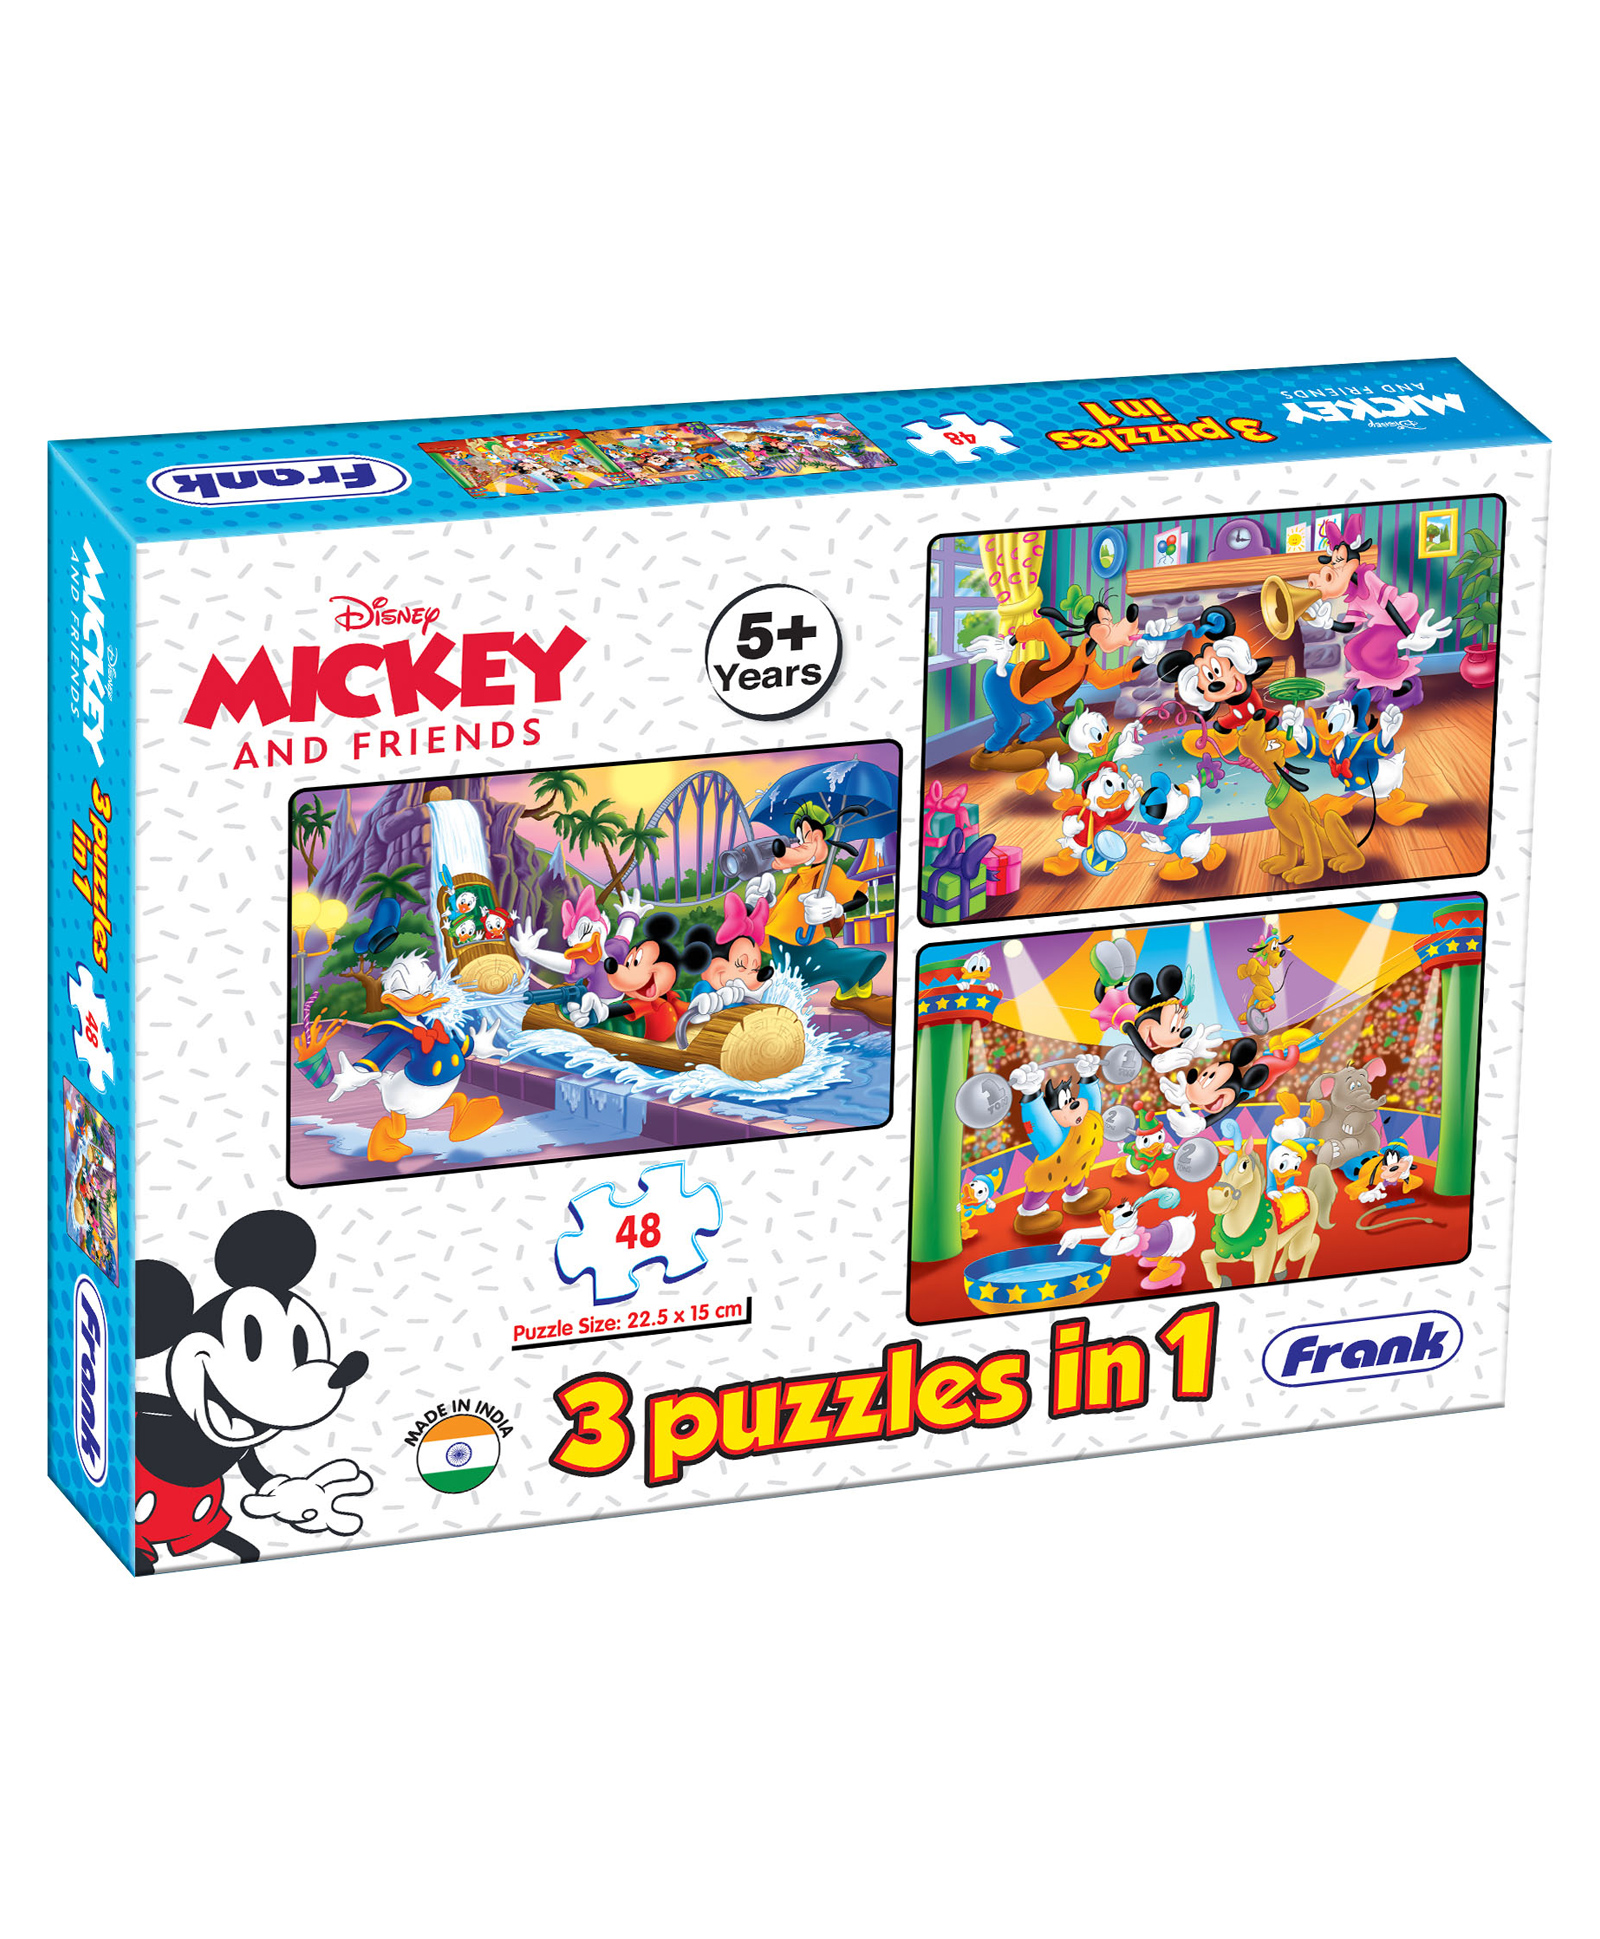 Hot New Disney 40 Pieces Mickey Mouse Jigsaw Puzzle Best Gifts for Kids 2#